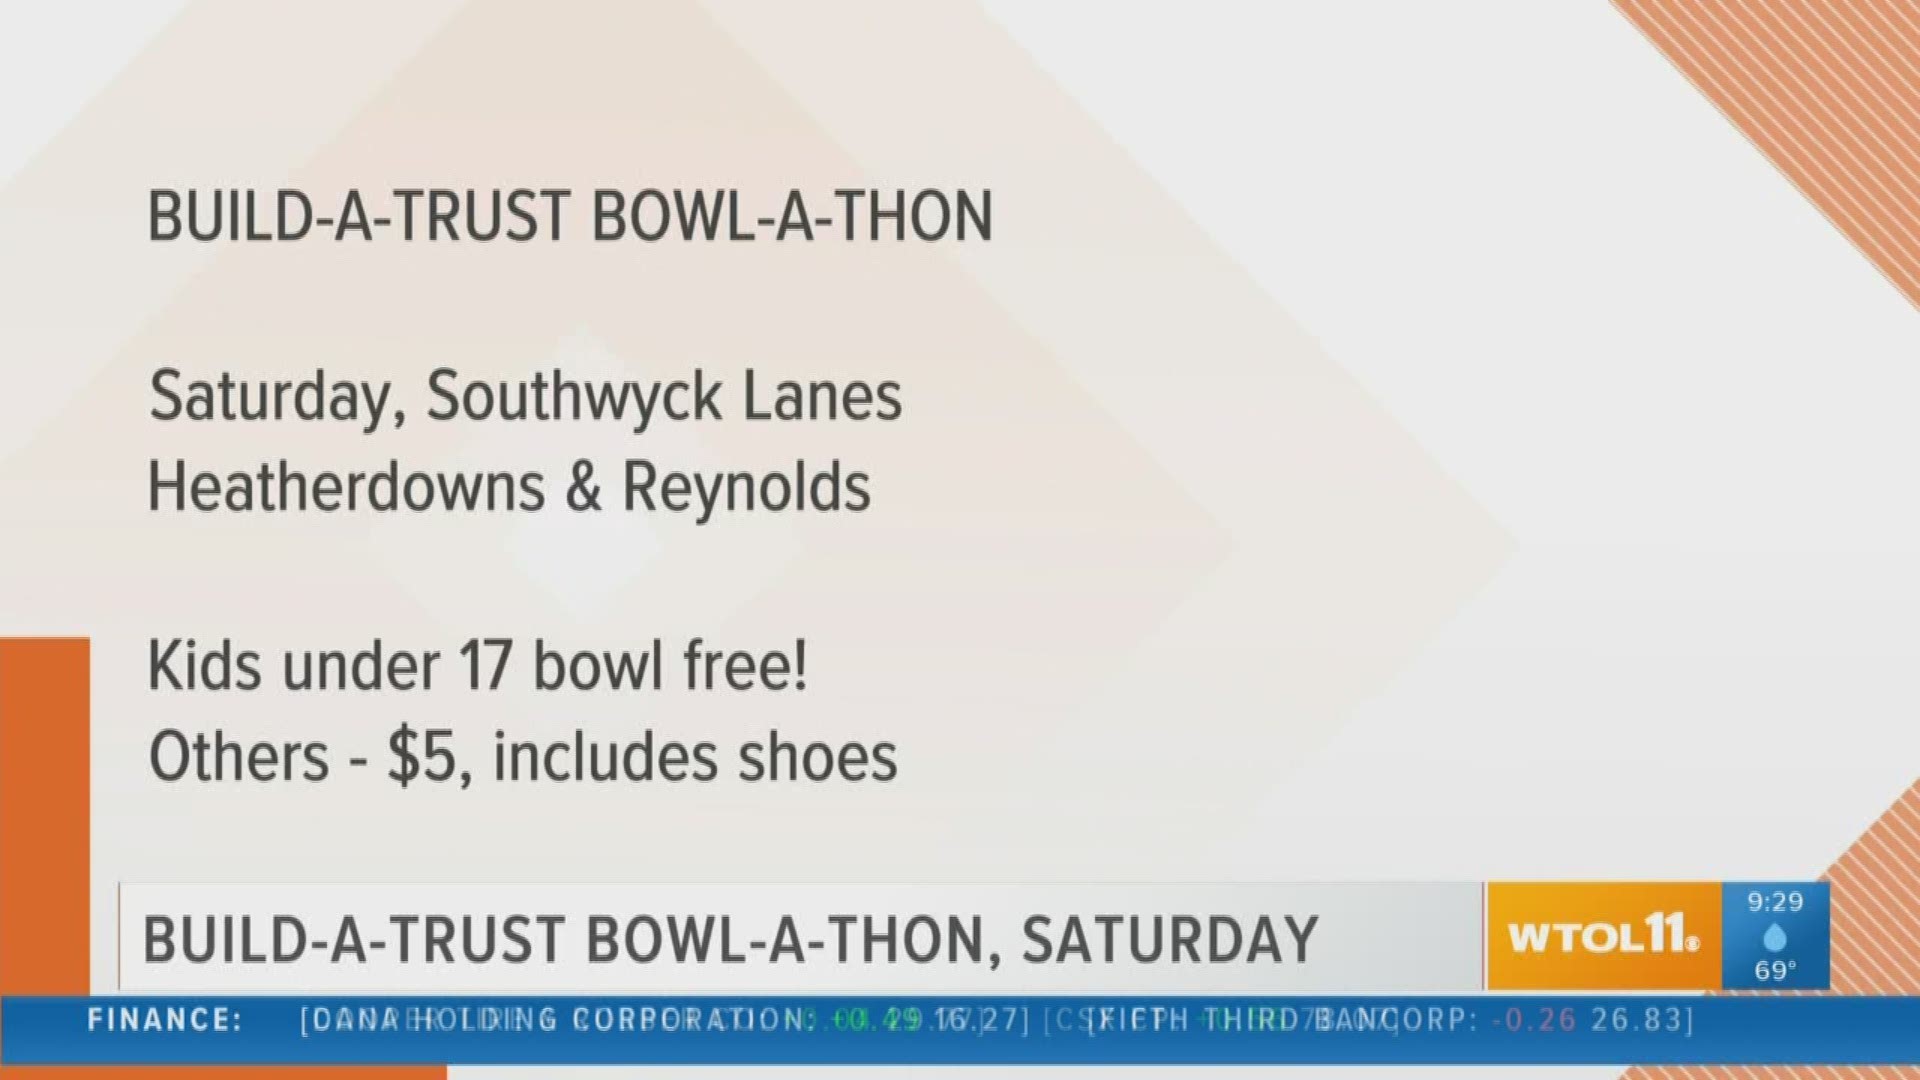 Attend the Build-A-Trust Bowl-A-Thon this Saturday at Southwyck Lanes!